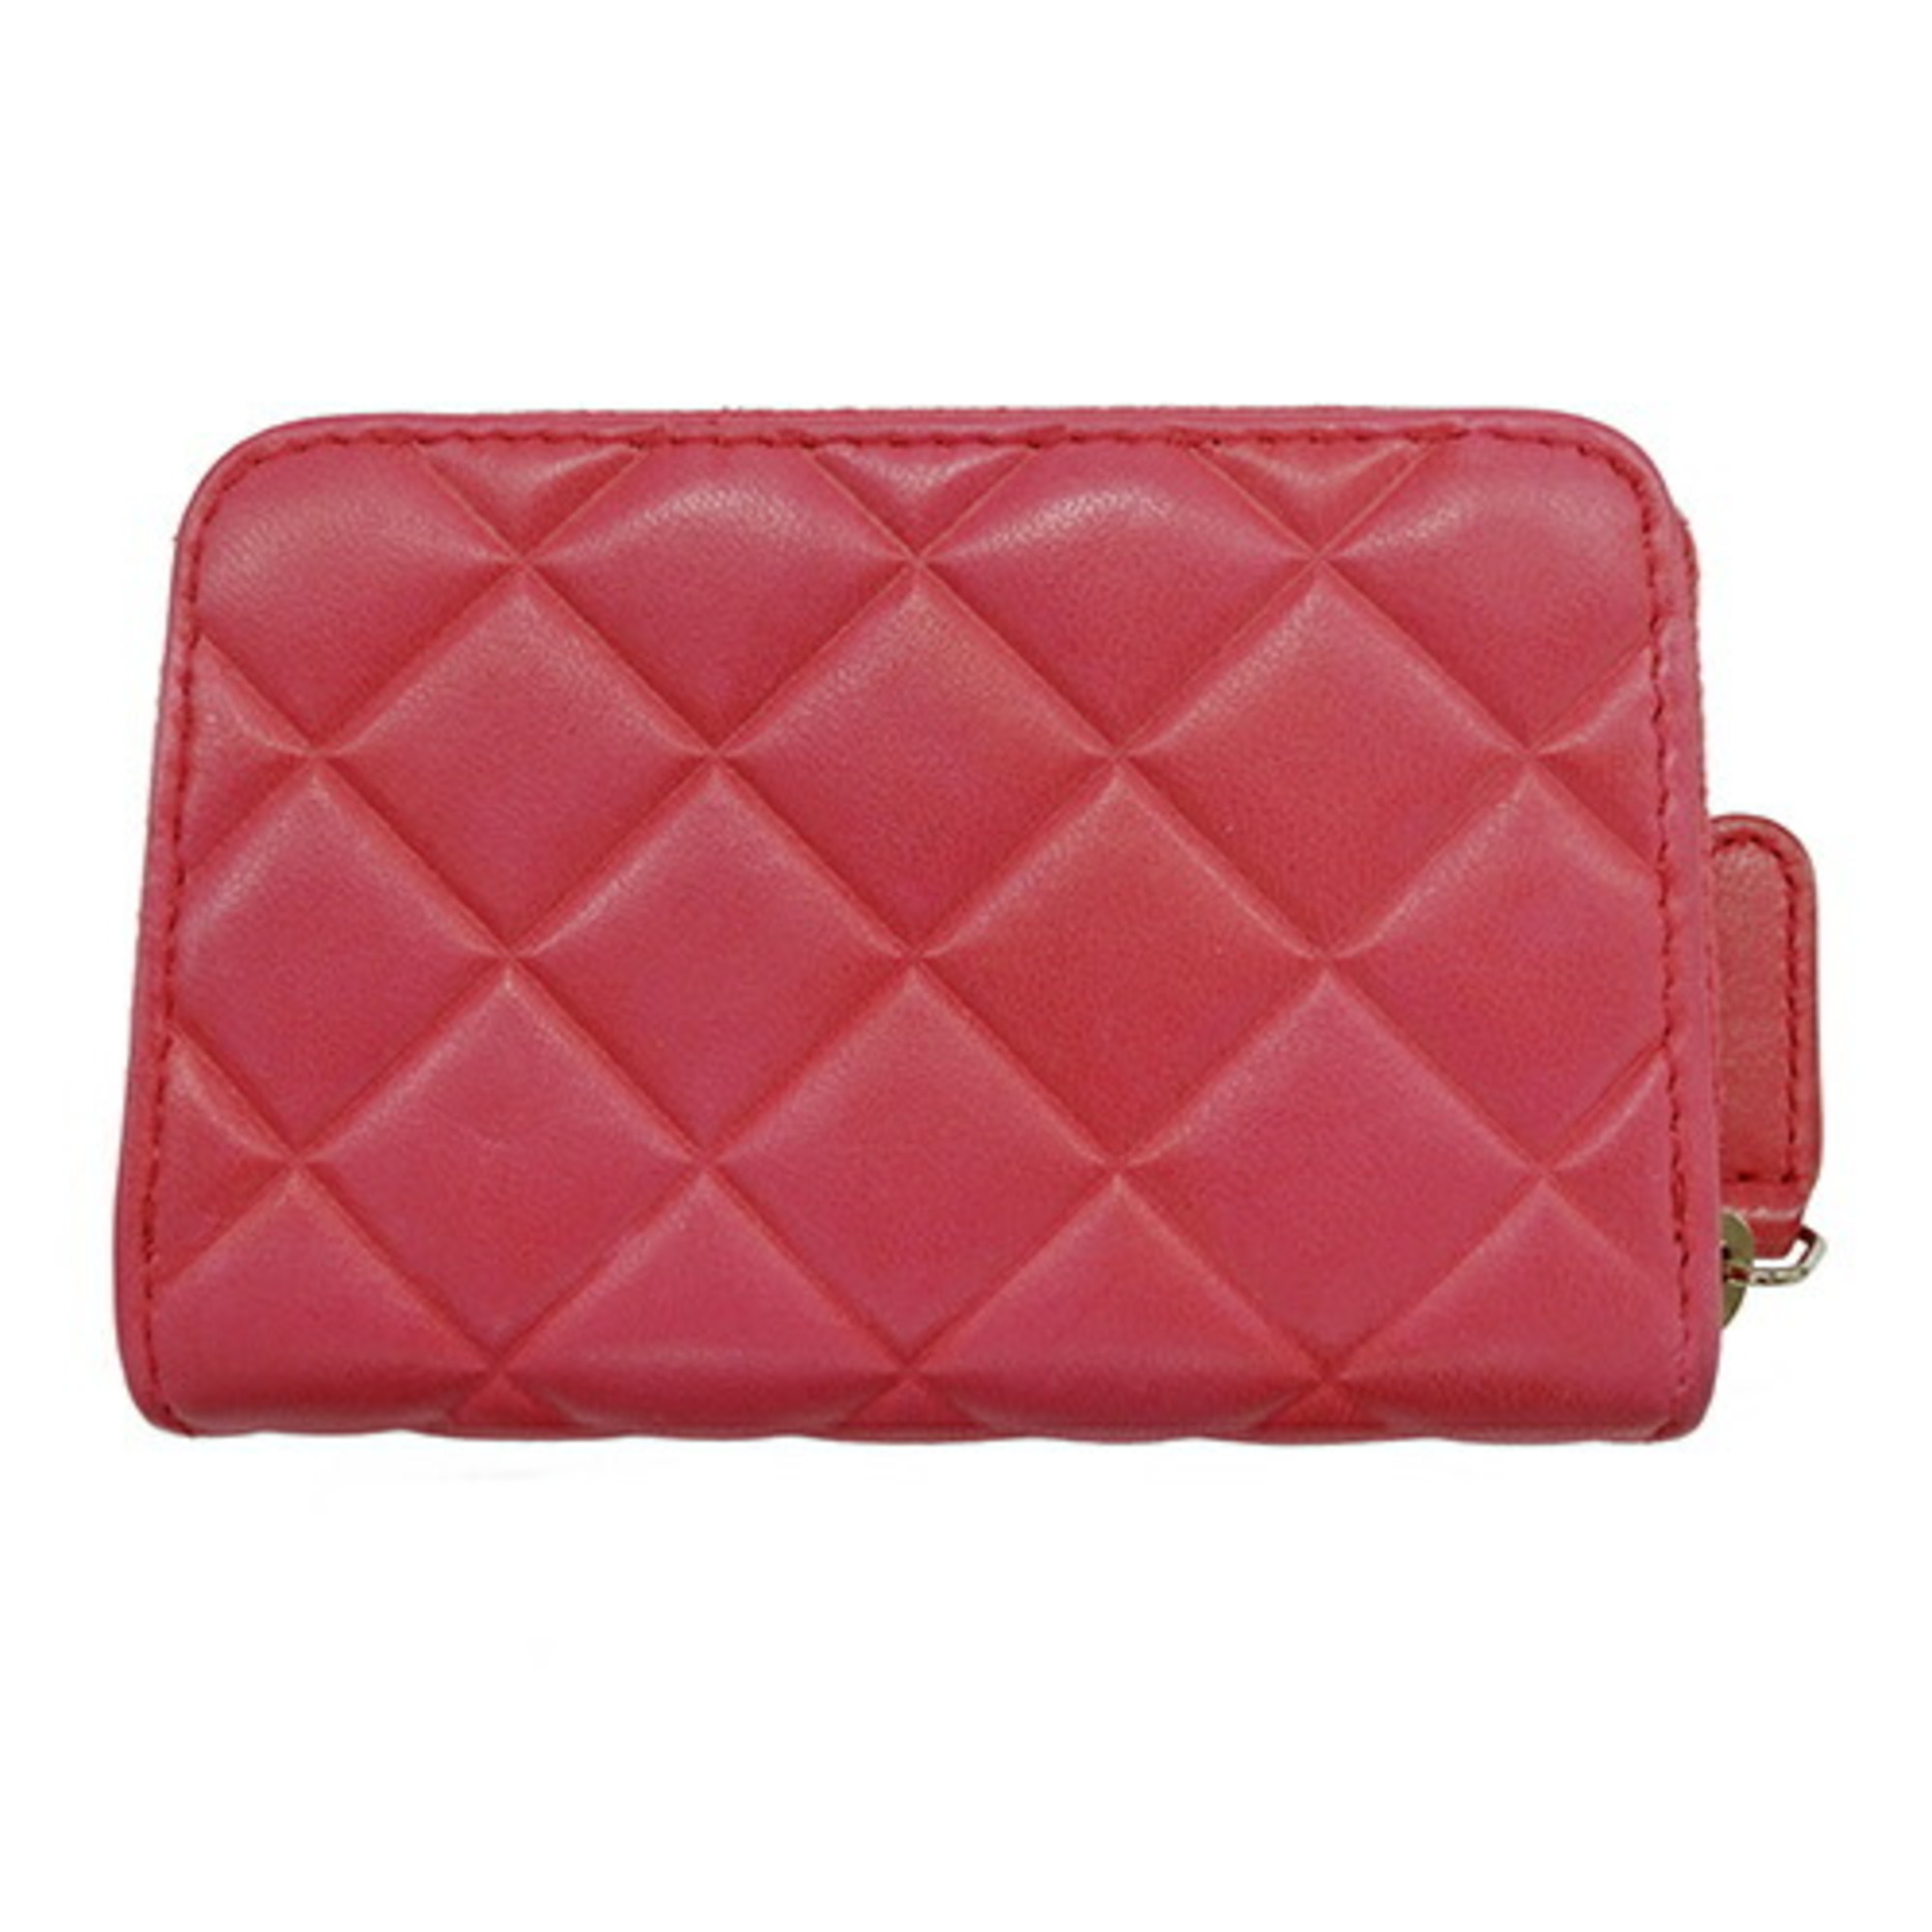 CHANEL Wallet Women's Brand Coin Case Purse Card Lambskin Matelasse Pink Gold Hardware Coco Mark Compact